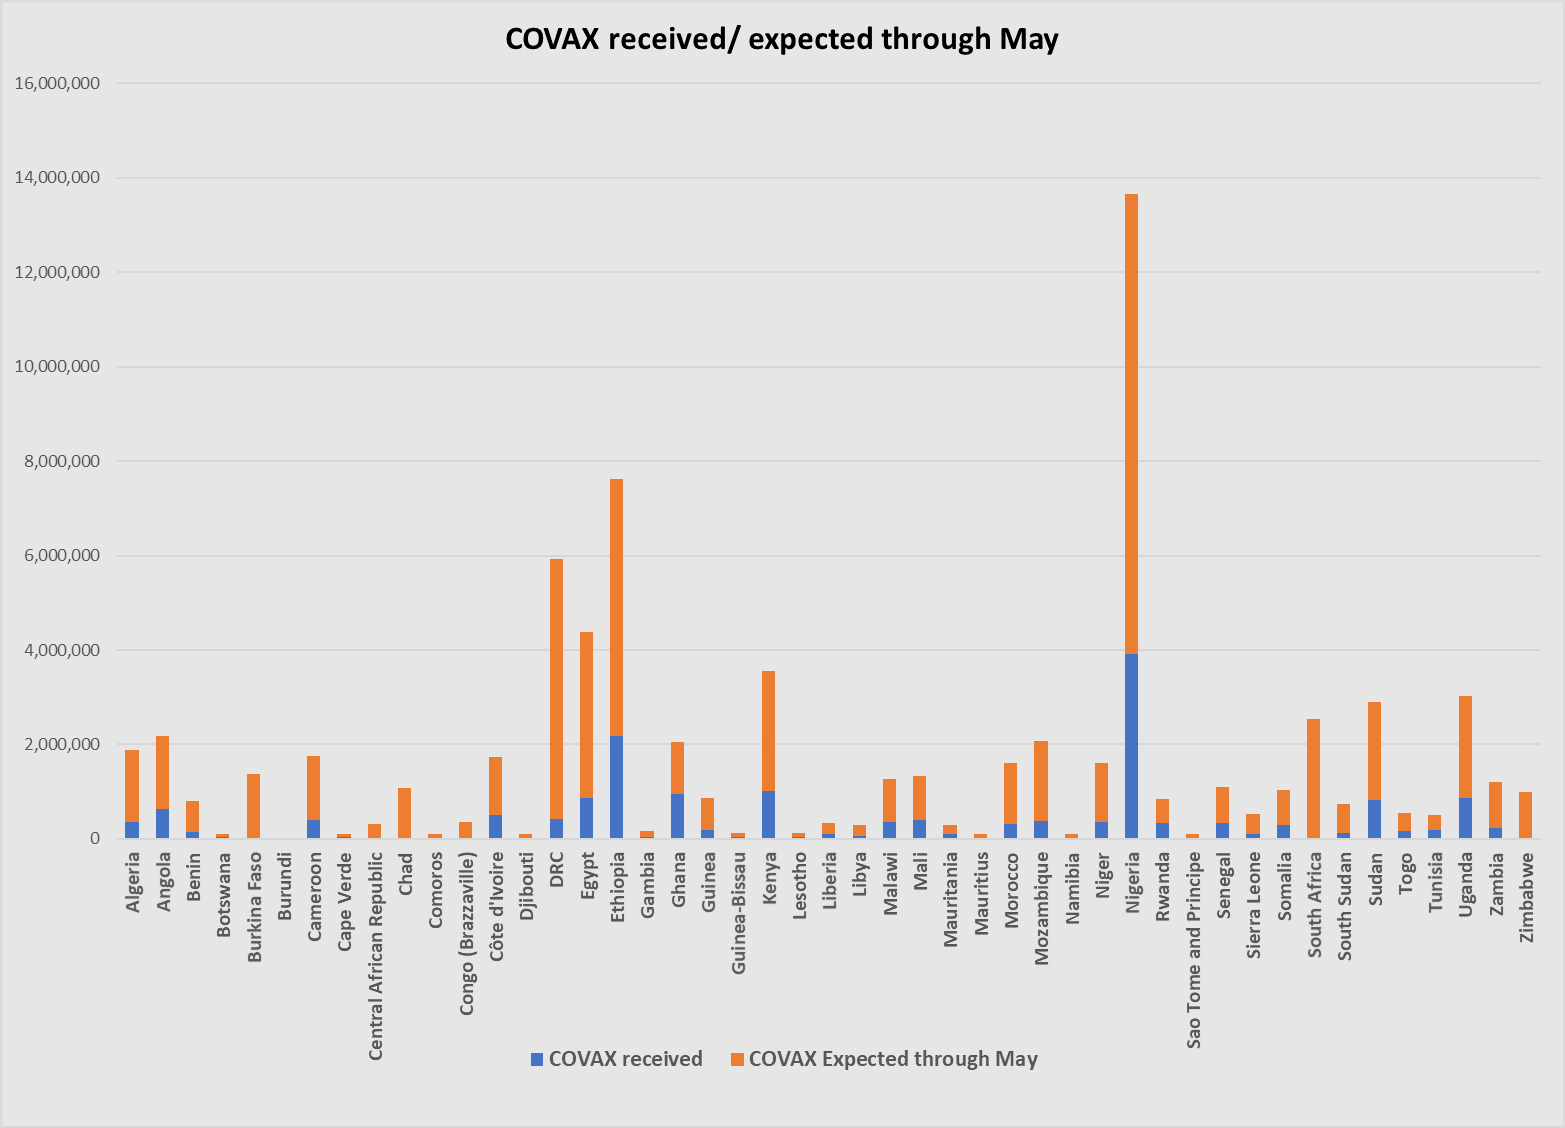 Figure 2 – Vaccine doses received/expected through May via COVAX